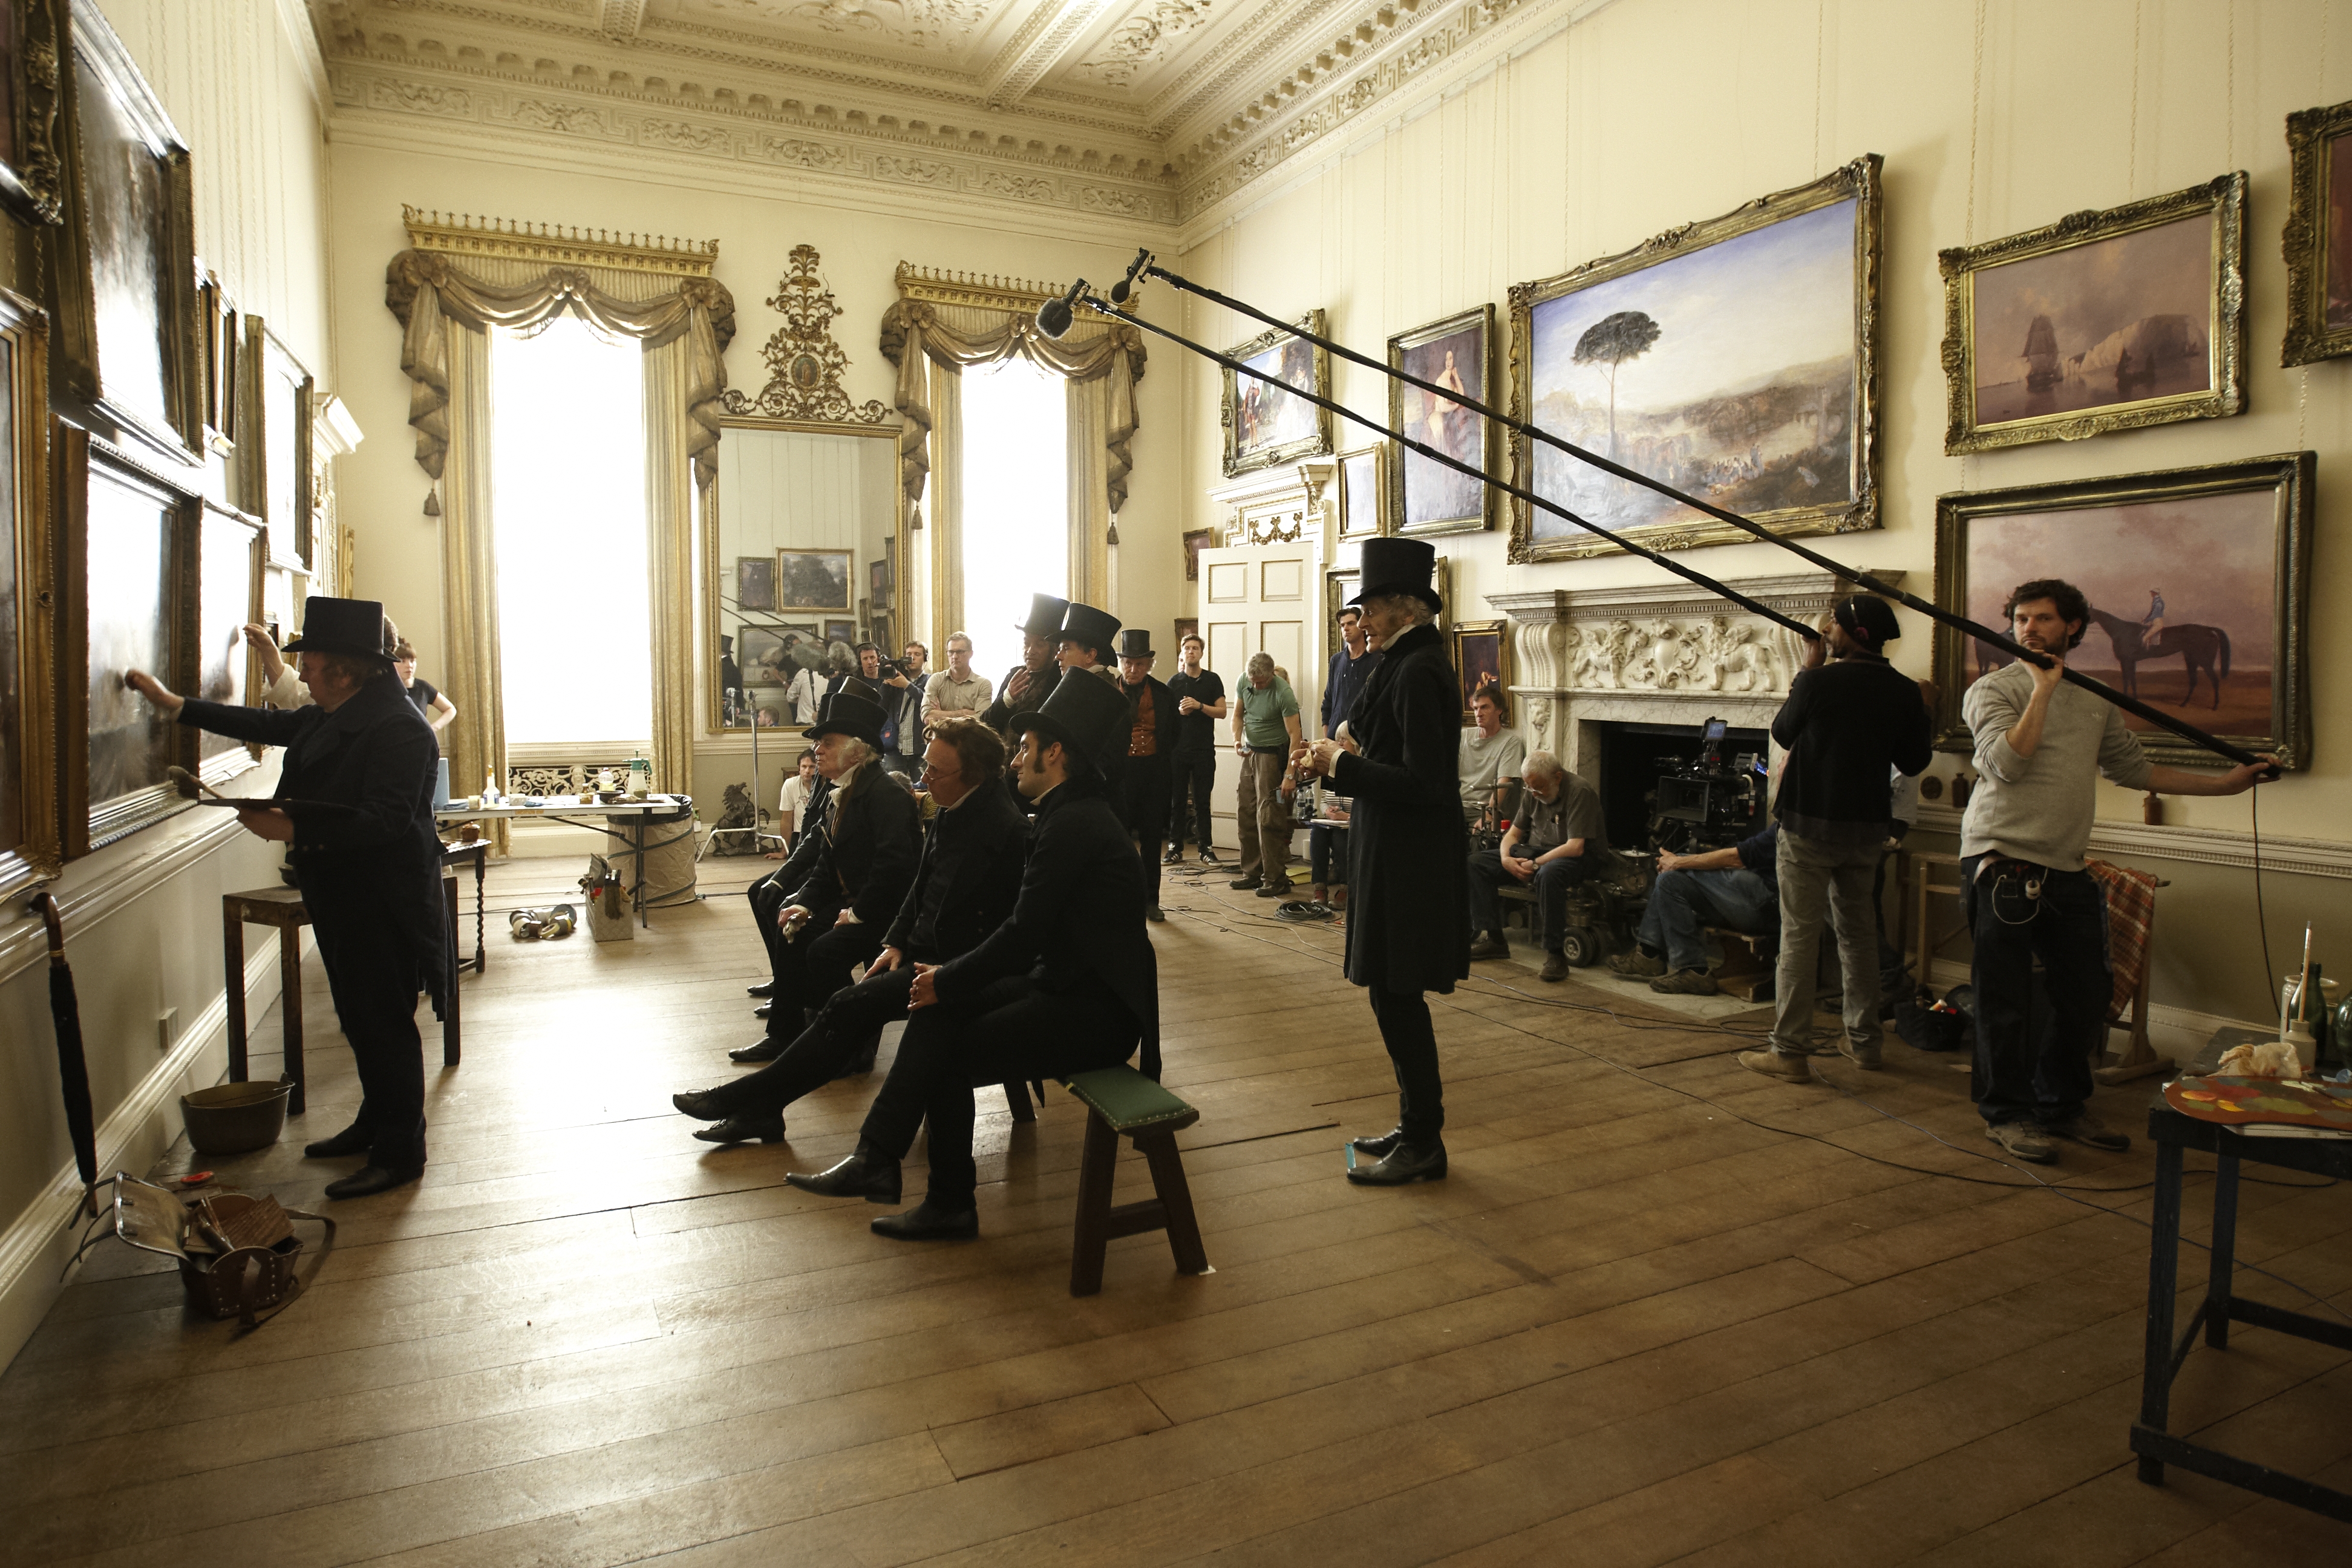 On set at Wentworth Woodhouse, Yorkshire